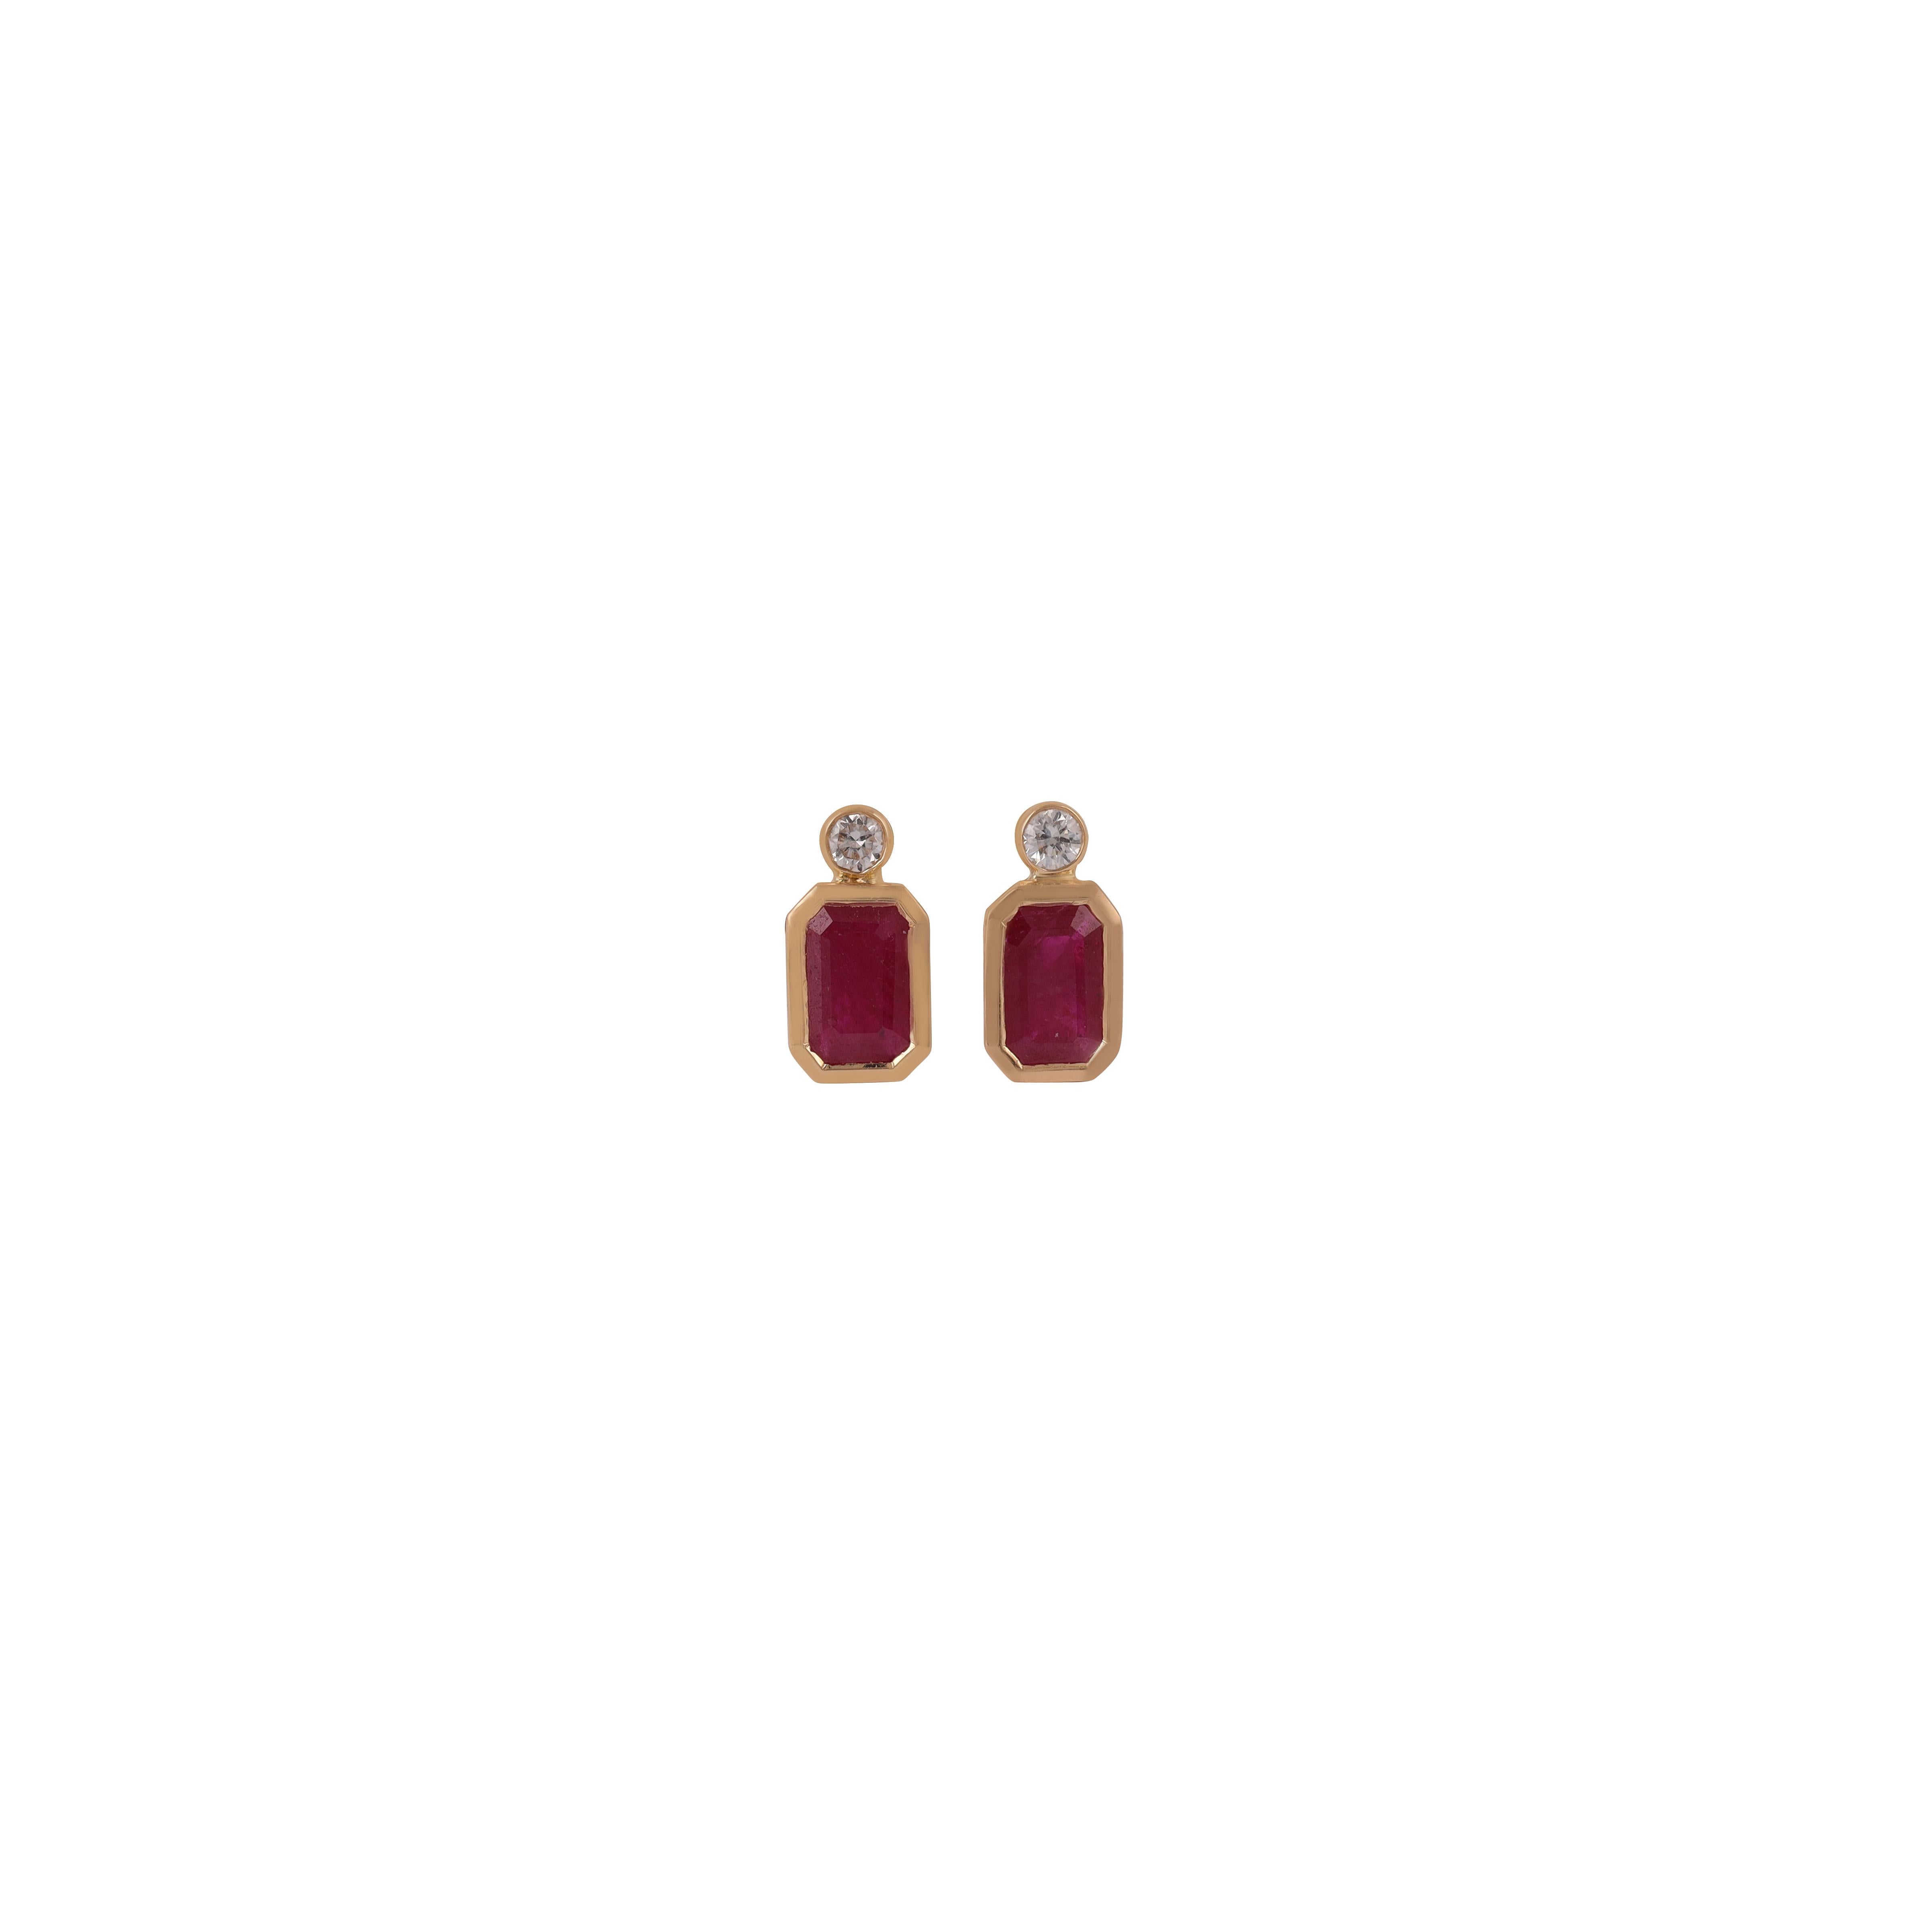 These bright 18K gold earrings are made in INDIA.
They feature a stud closure and each earrings consist of one Emerald  cut ruby red in the Centre and on top  smaller brilliant cut white diamonds.

Rubies 0.98ct
Diamonds total content is 0.09ct
18k